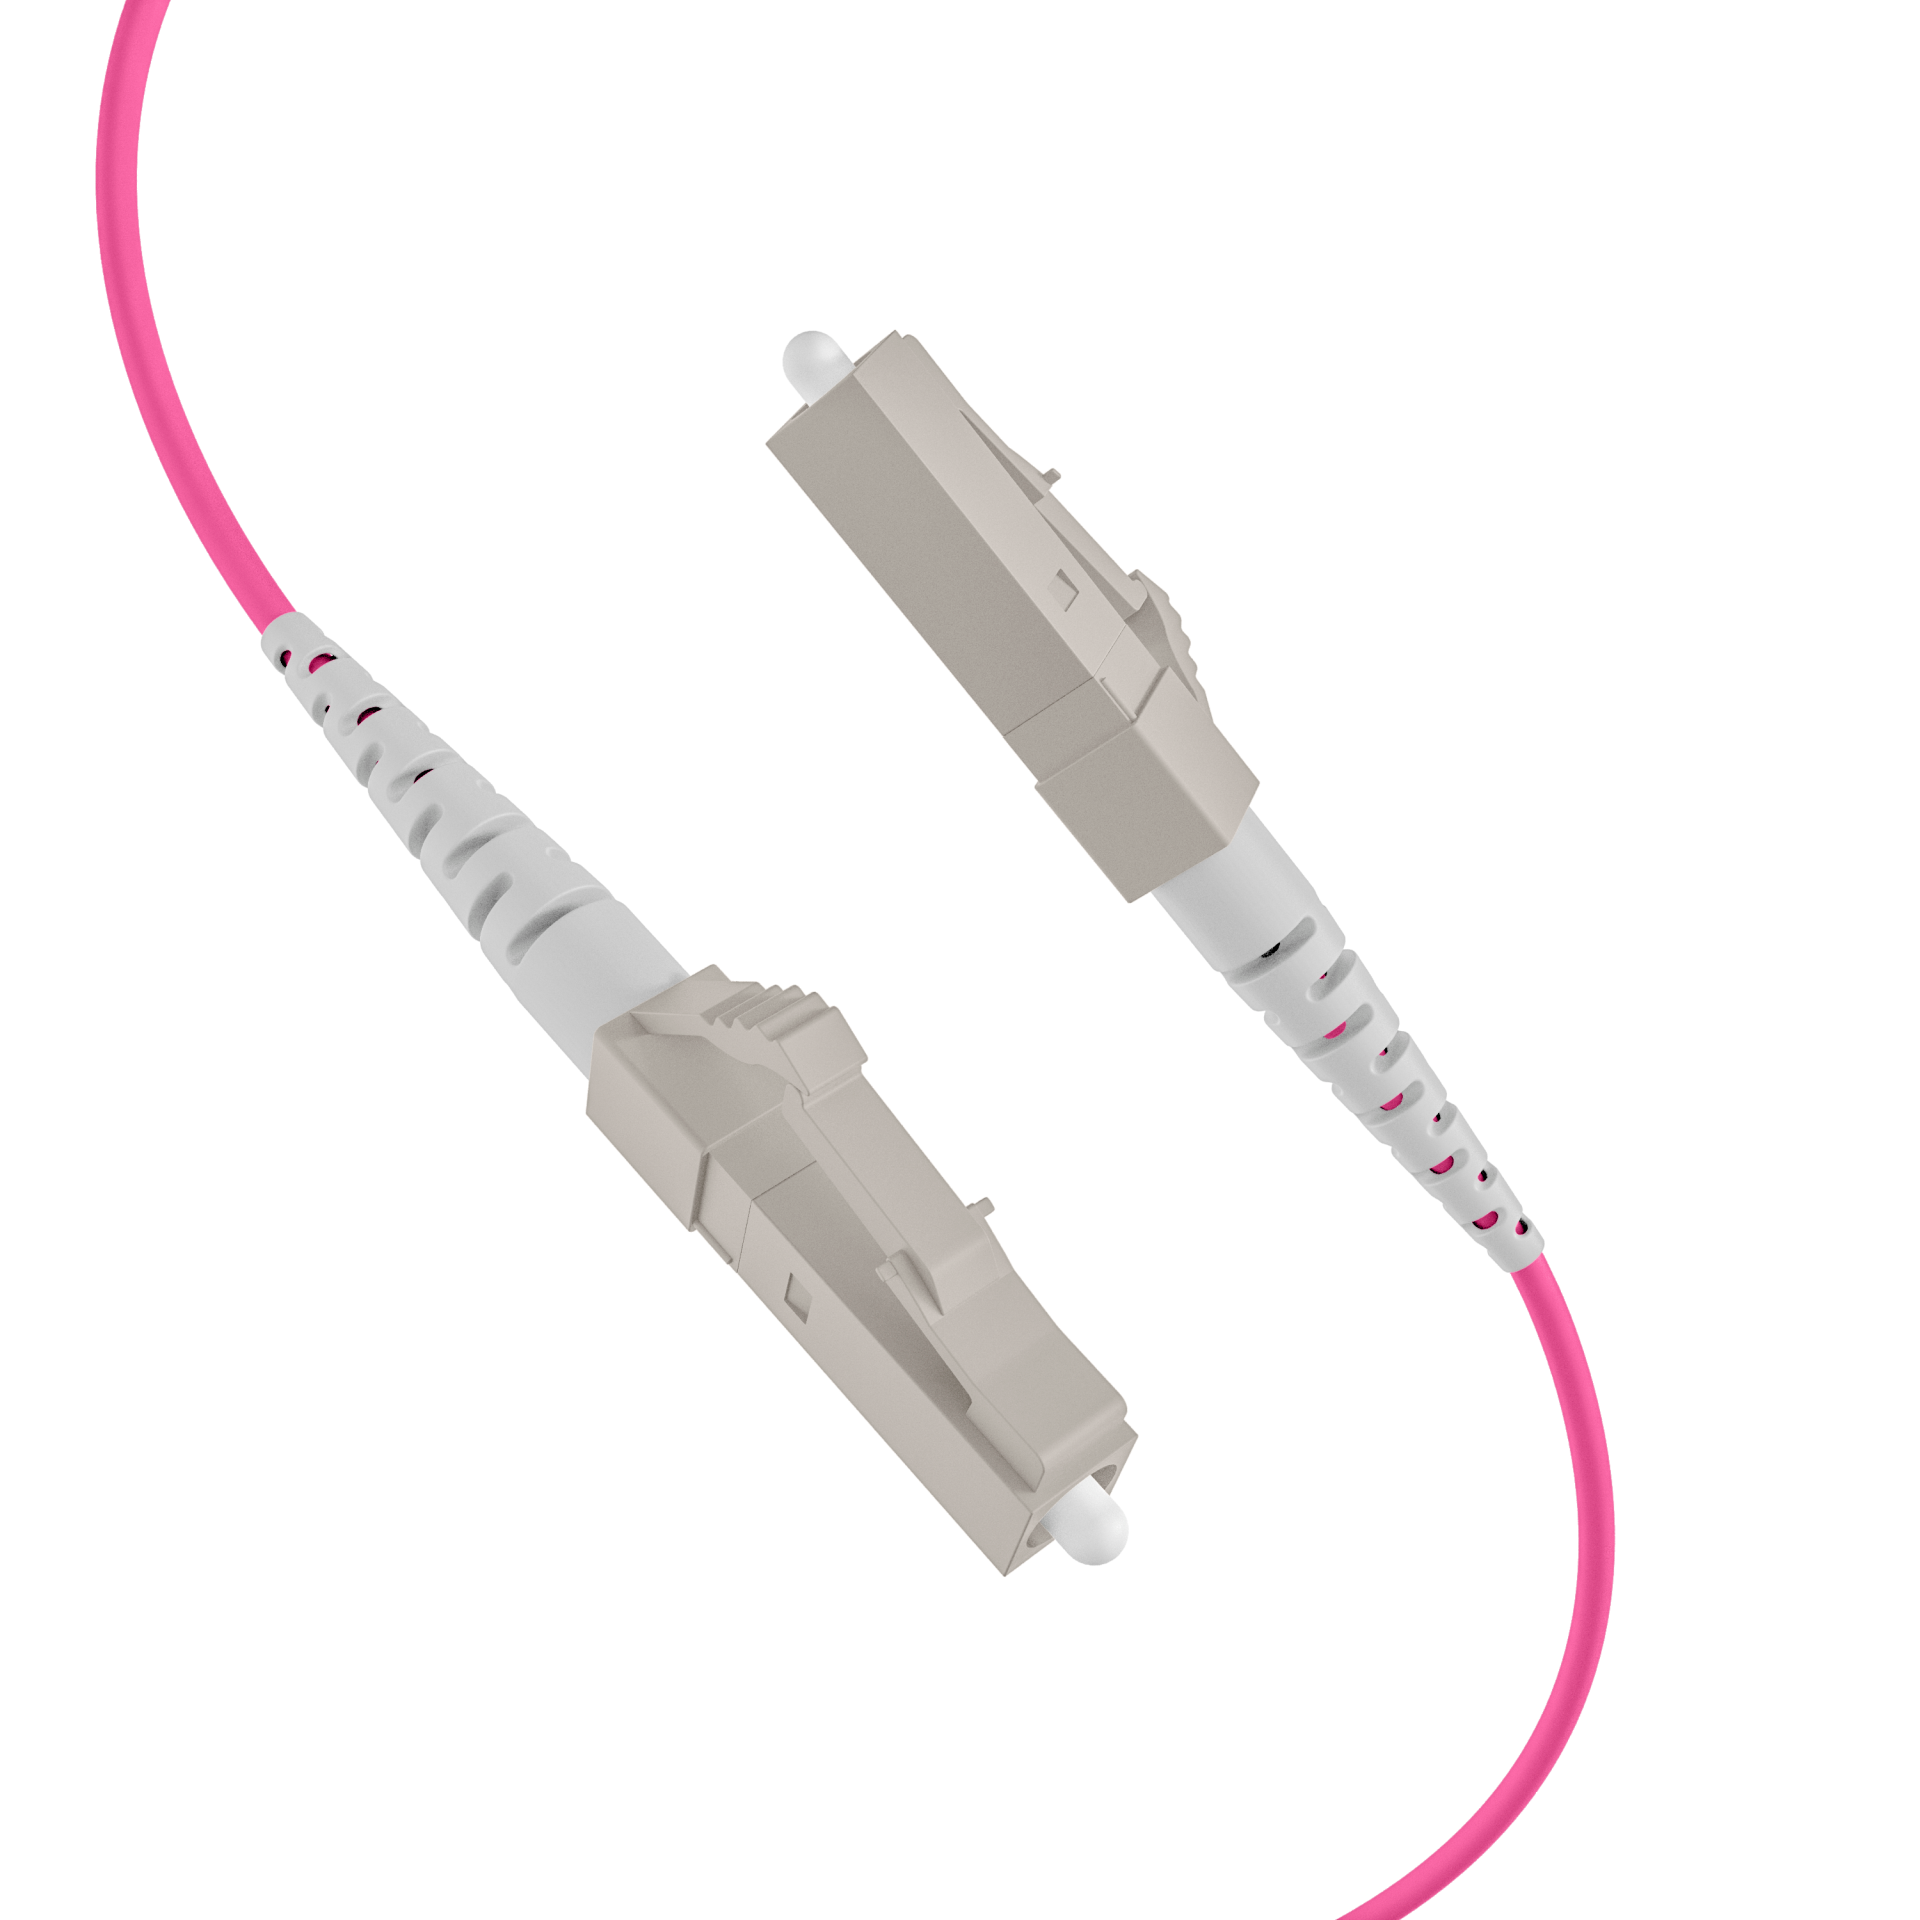 Trunkcable U-DQ(ZN)BH OM4 8G (1x8) LC-LC,150m Dca LSZH